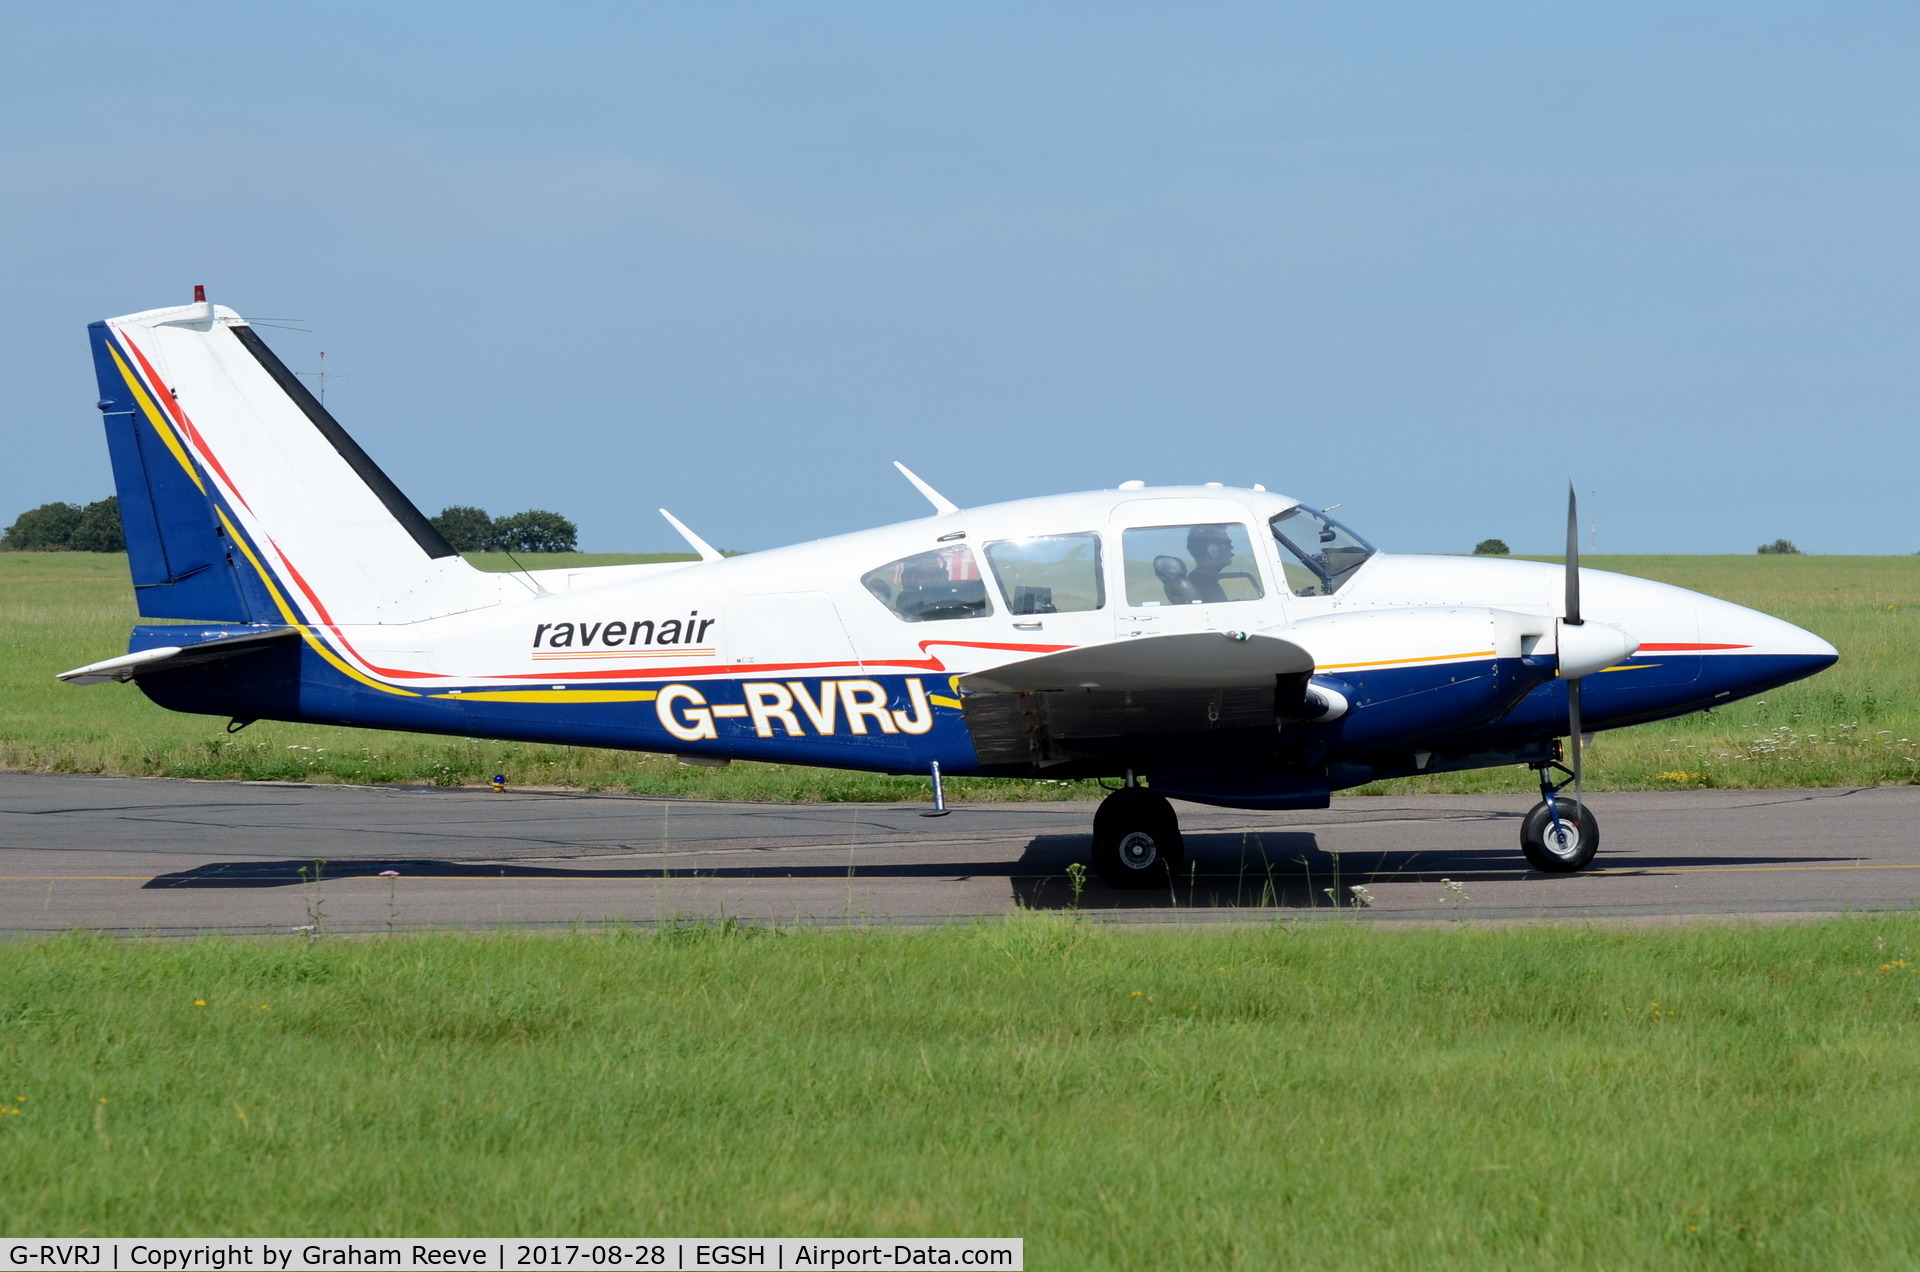 G-RVRJ, 1973 Piper PA-23-250 Aztec E C/N 27-7305004, Departing from Norwich.